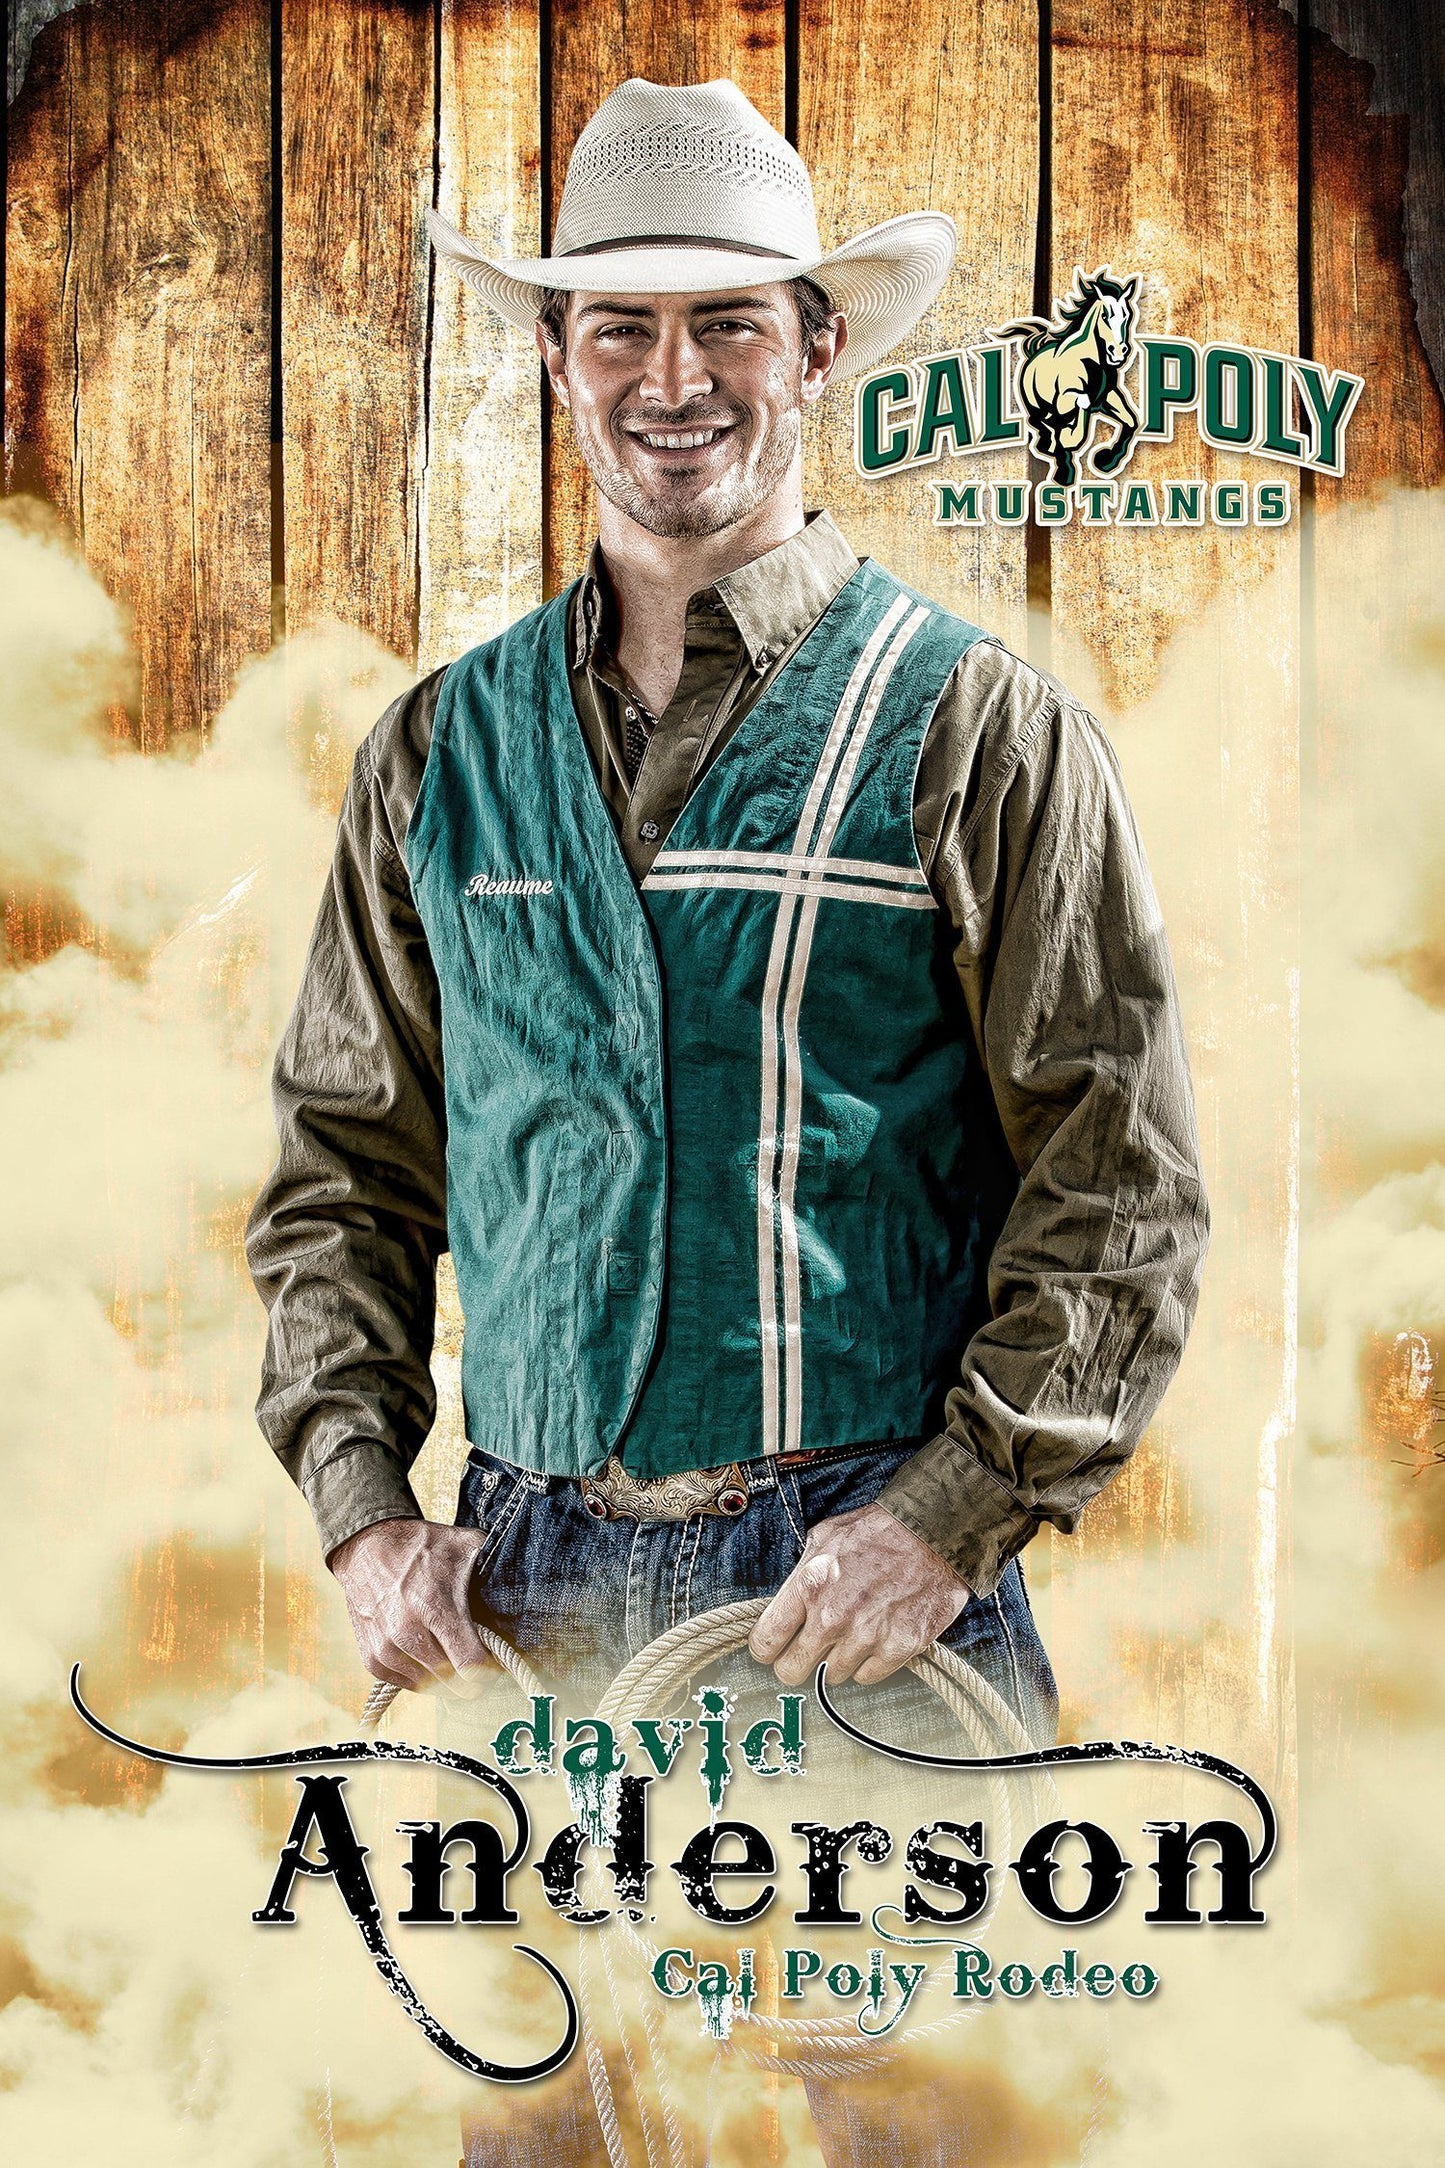 Saddle Up - Cinema Series - Player Banner & Poster Template-Photoshop Template - Photo Solutions